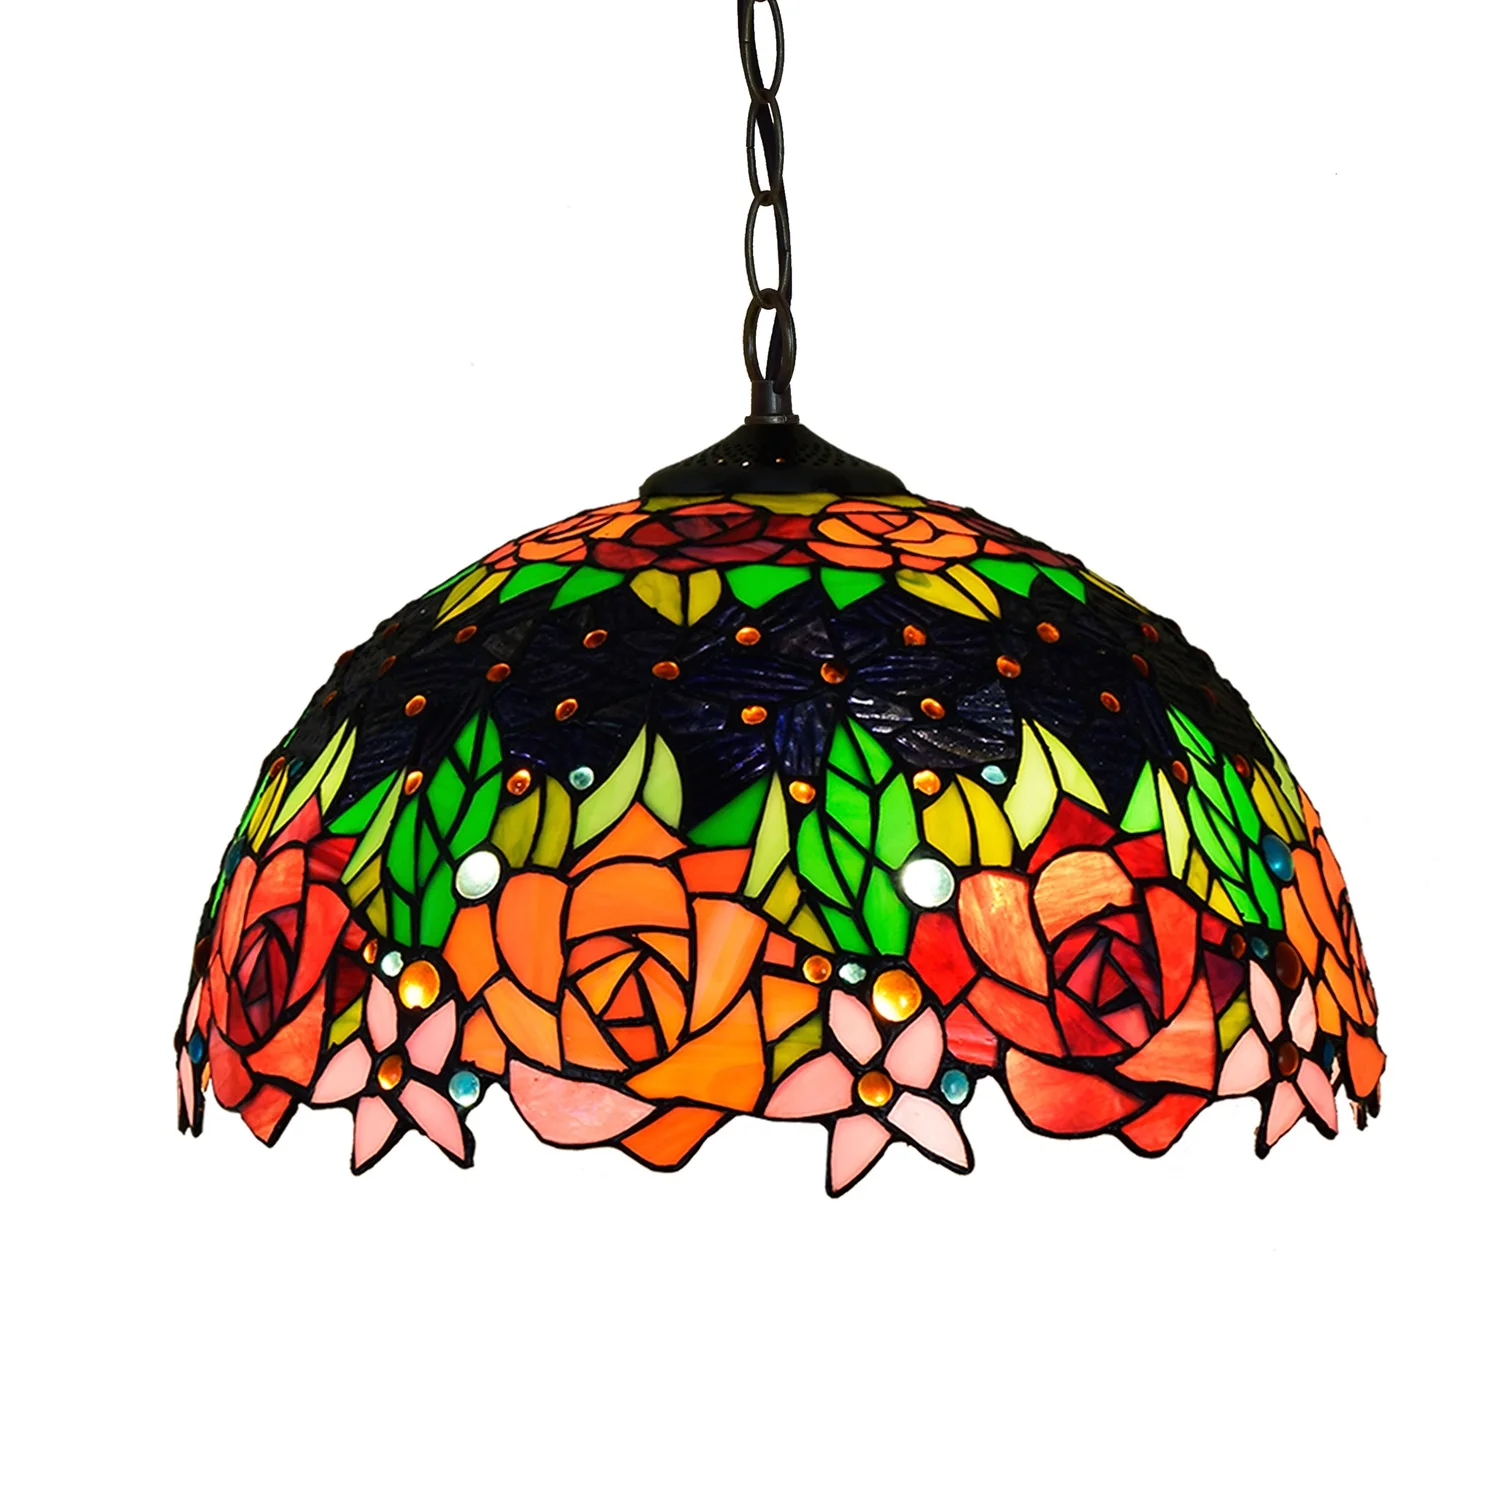 16 Inches Stained glass Style Black-bottom Glass Roses Pendant lamp American Rural retro creative classic bedroom Restaurant